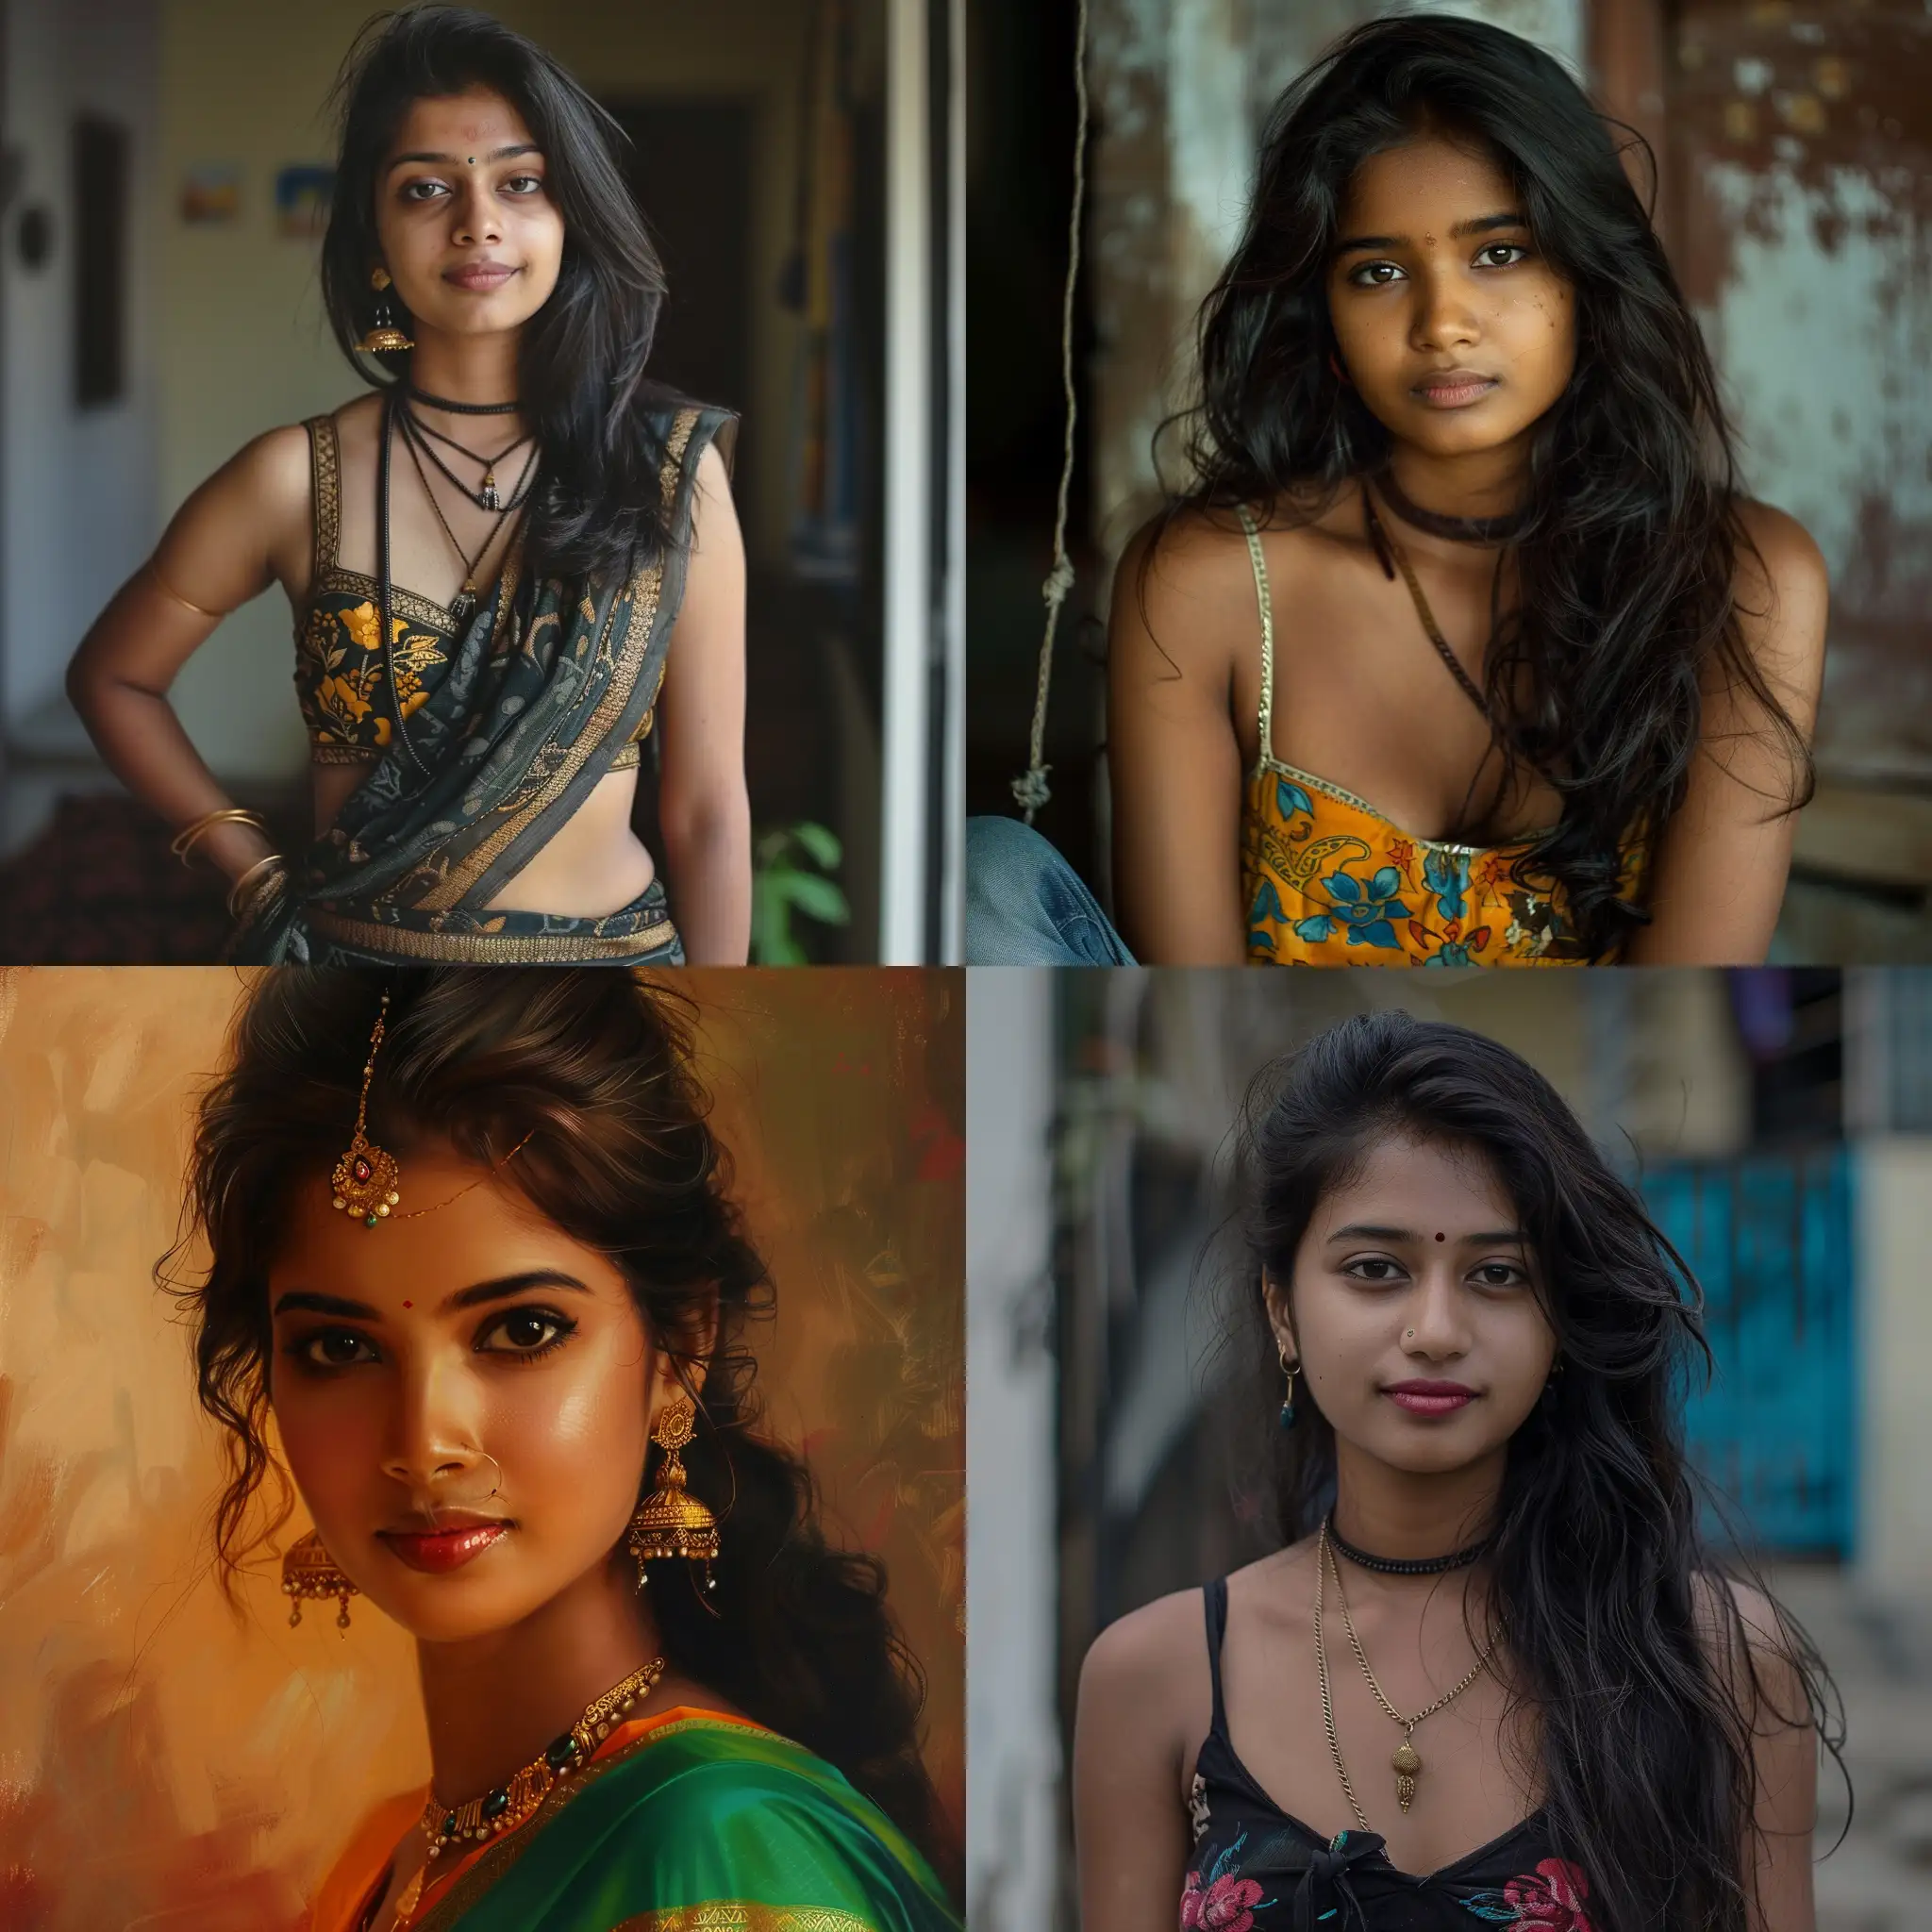 Tamil-Girls-in-Traditional-Sleeveless-Attire-Vibrant-Cultural-Portraits